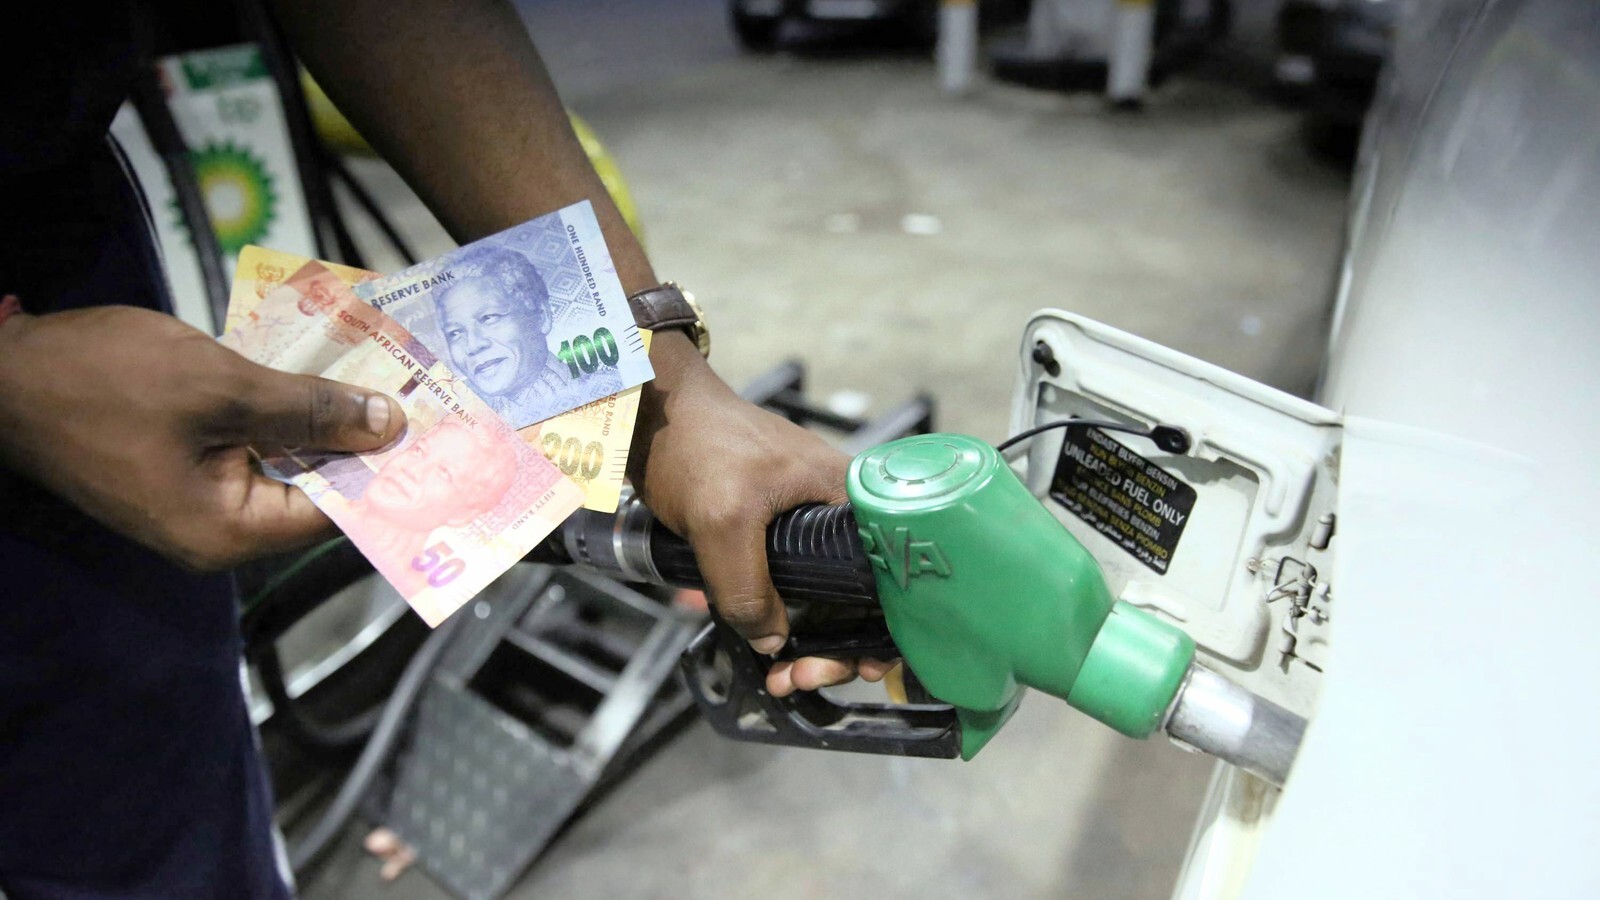 SA petrol service stations lost R7bn profit due to poor regulation by DMRE - FRA